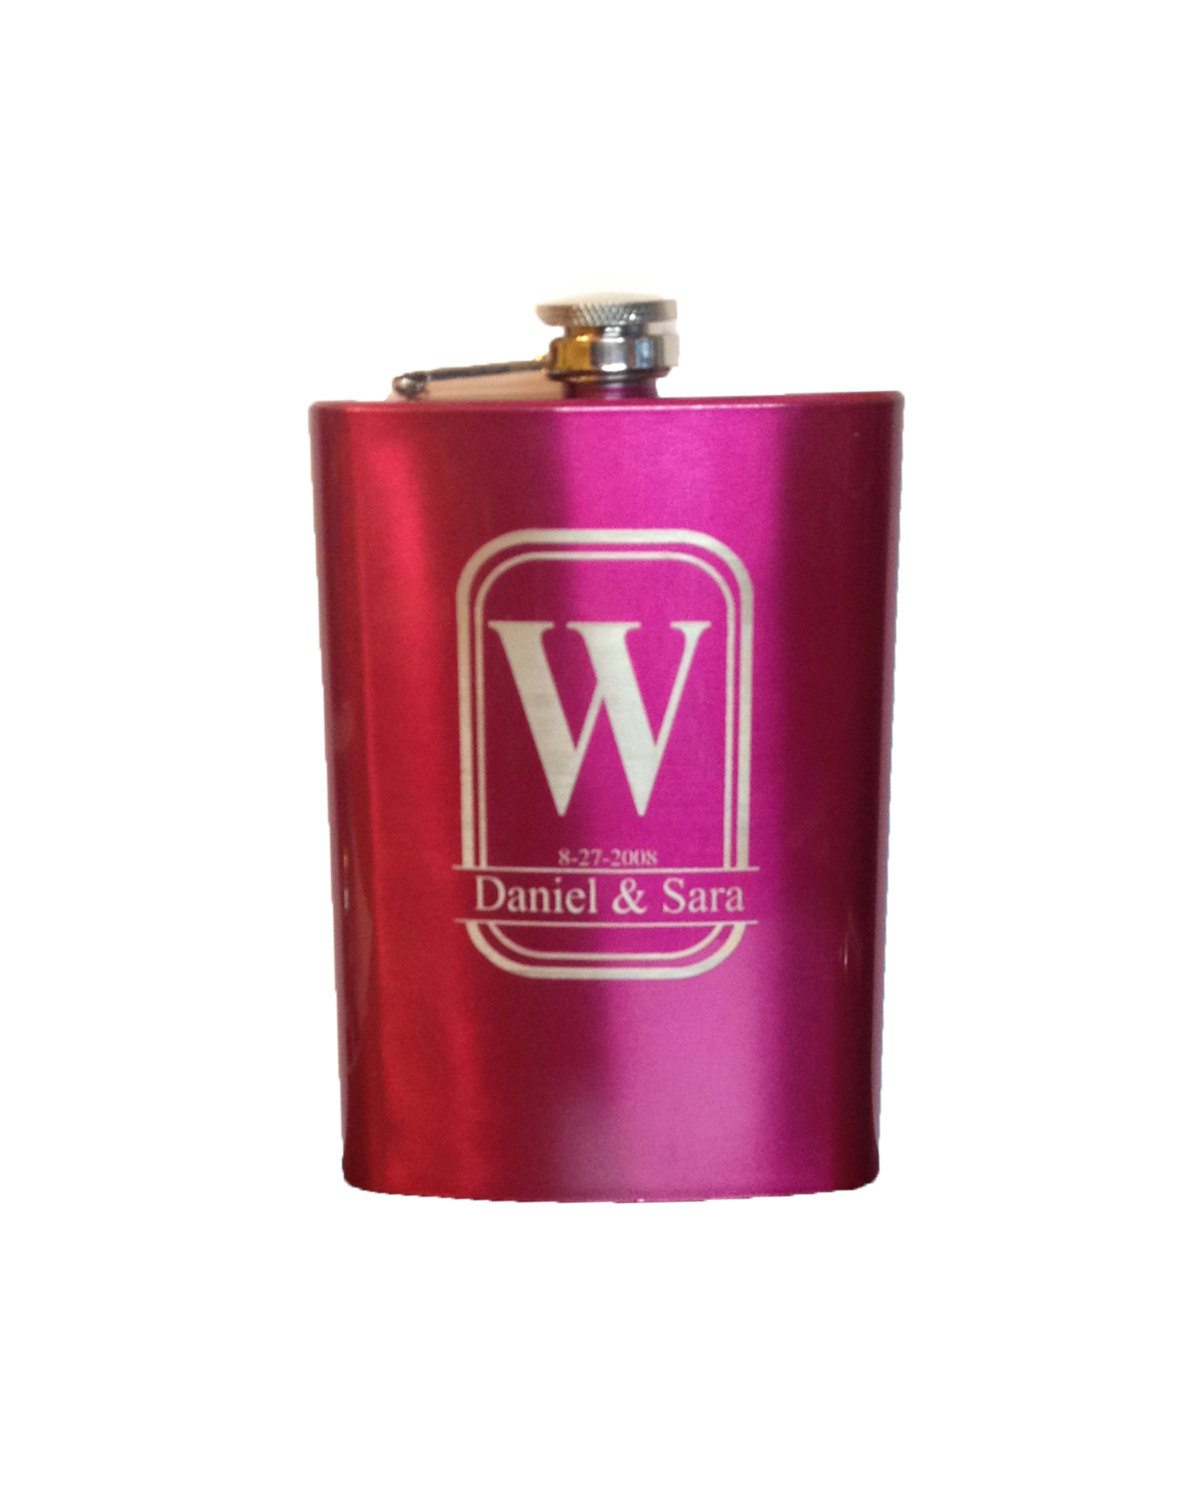 8 8 Oz Etched Pink Engraved Flask Stainless Steel High Gloss Engraved Personalized Groomsman Gift Bridesmaid Gift Wedding Favor